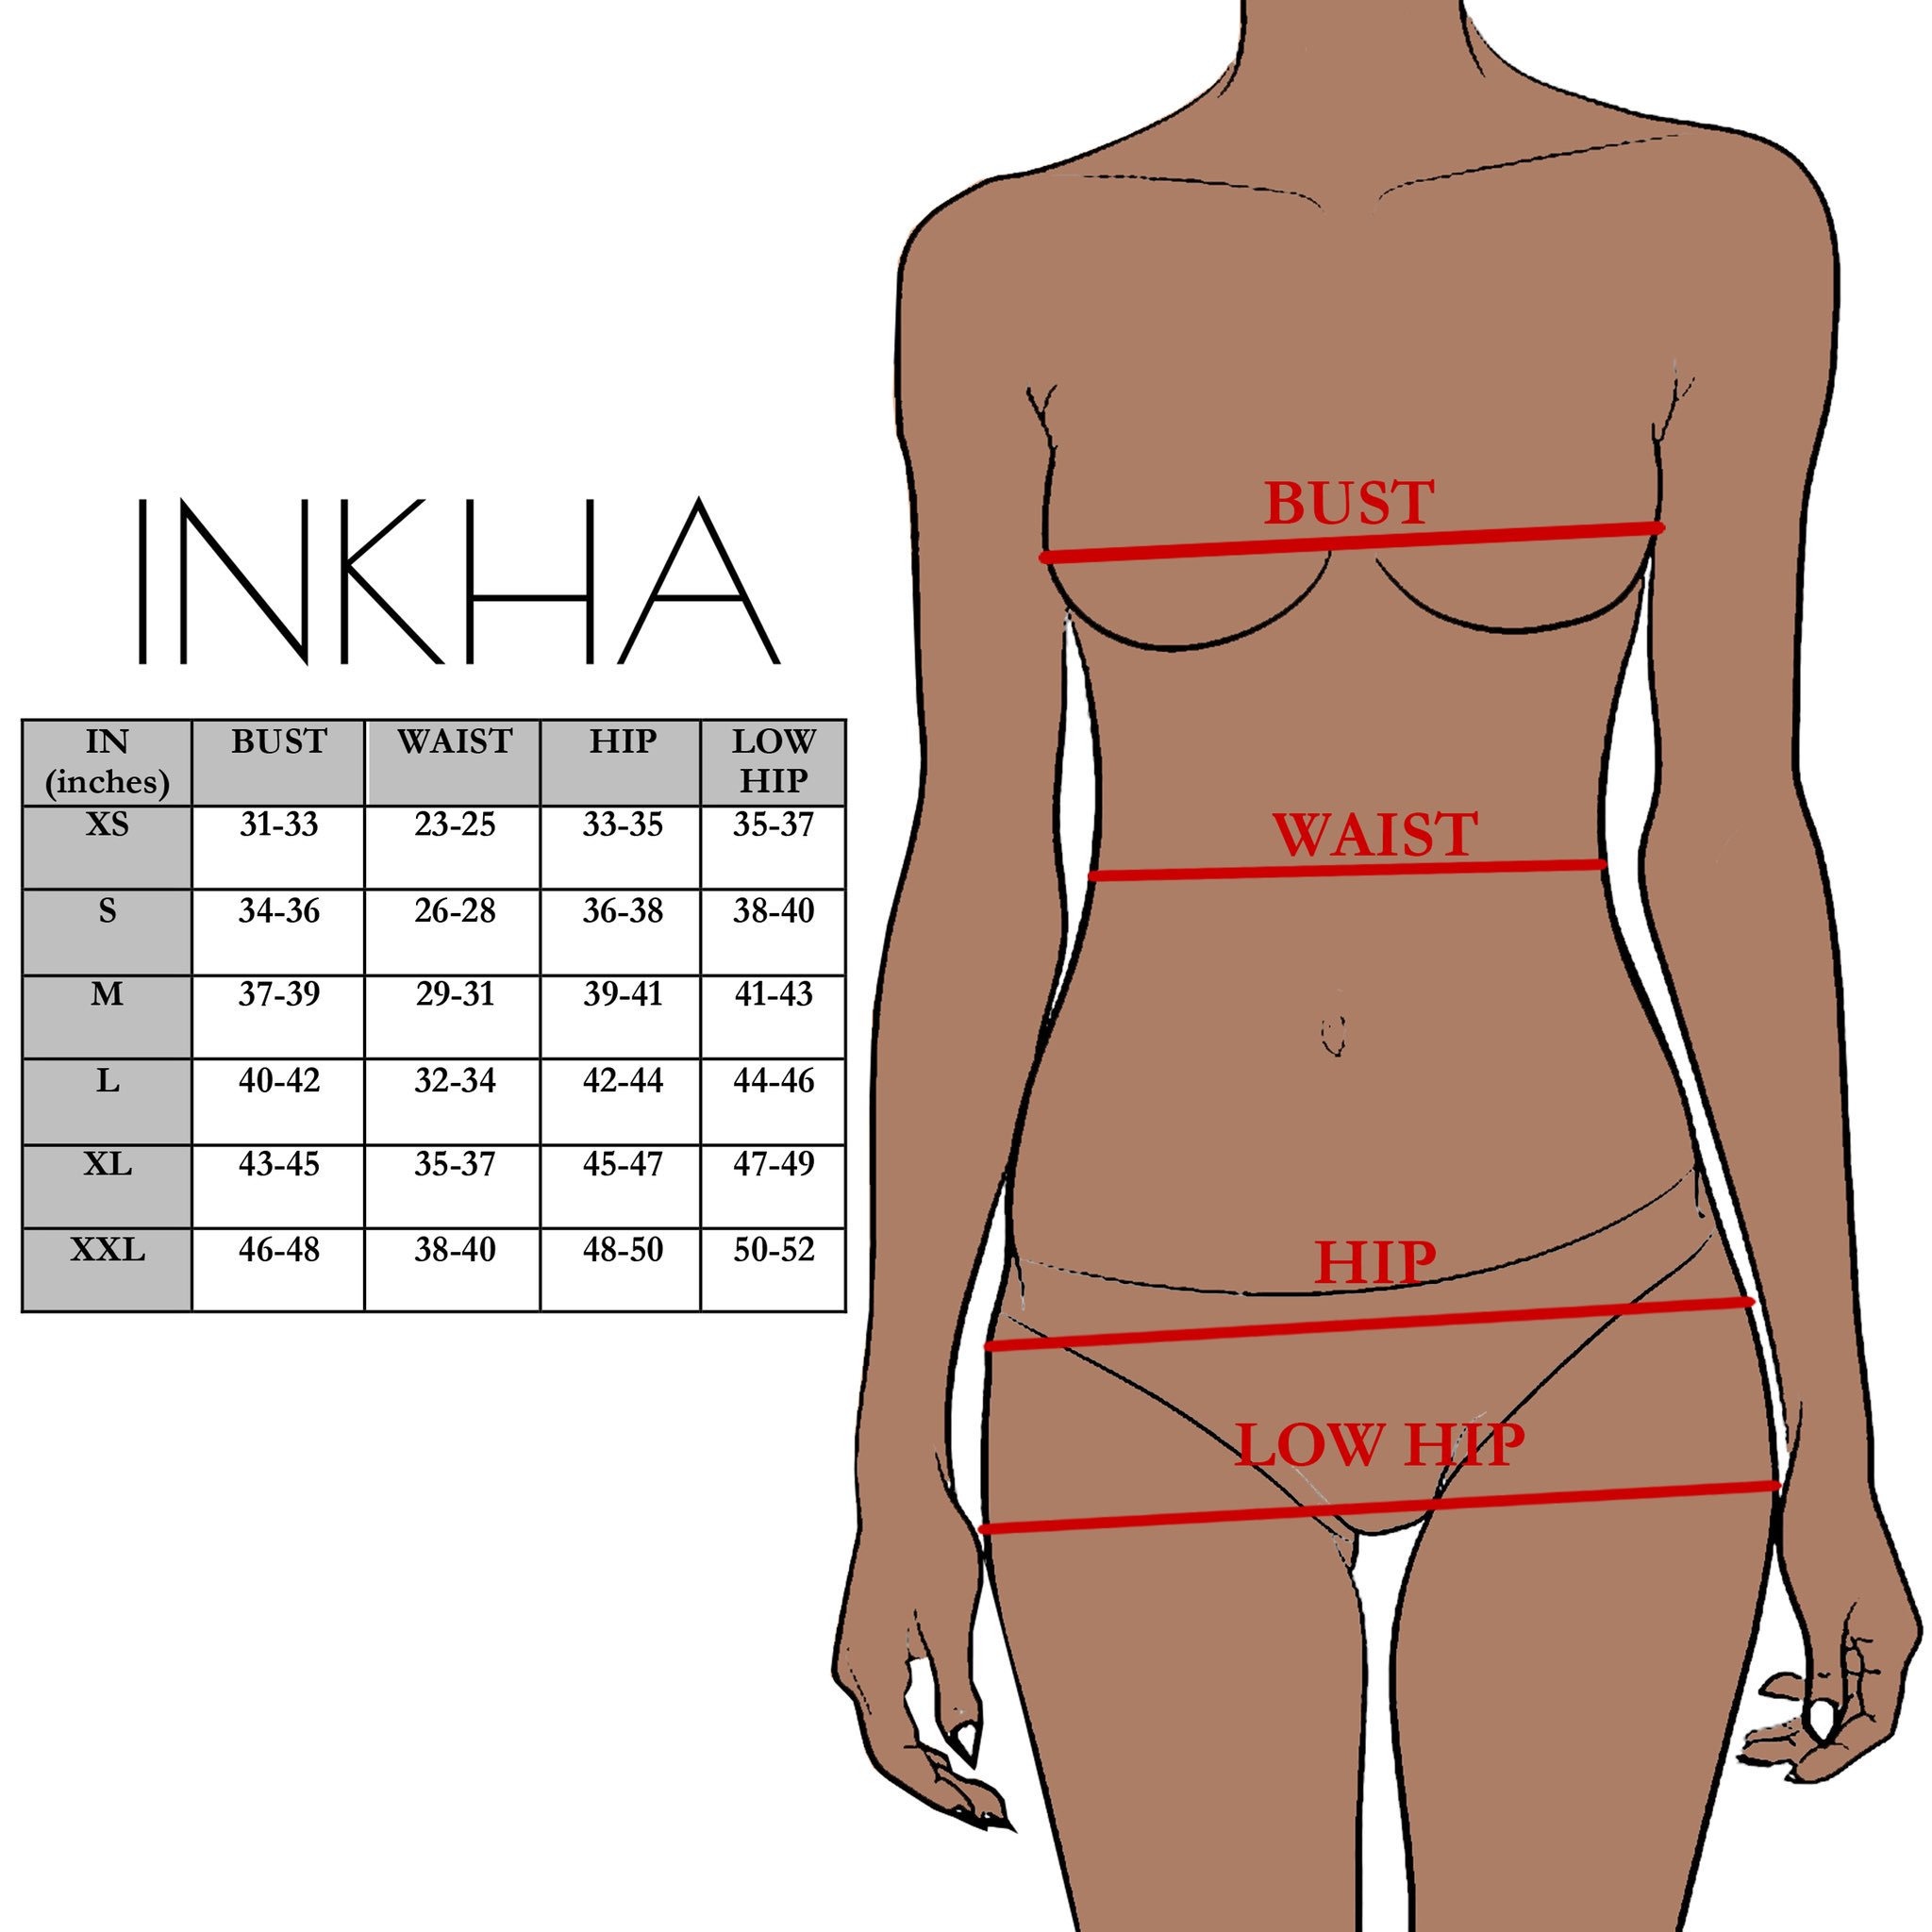 INKHA on X: Using a measuring tape, in inches: Bust - measure